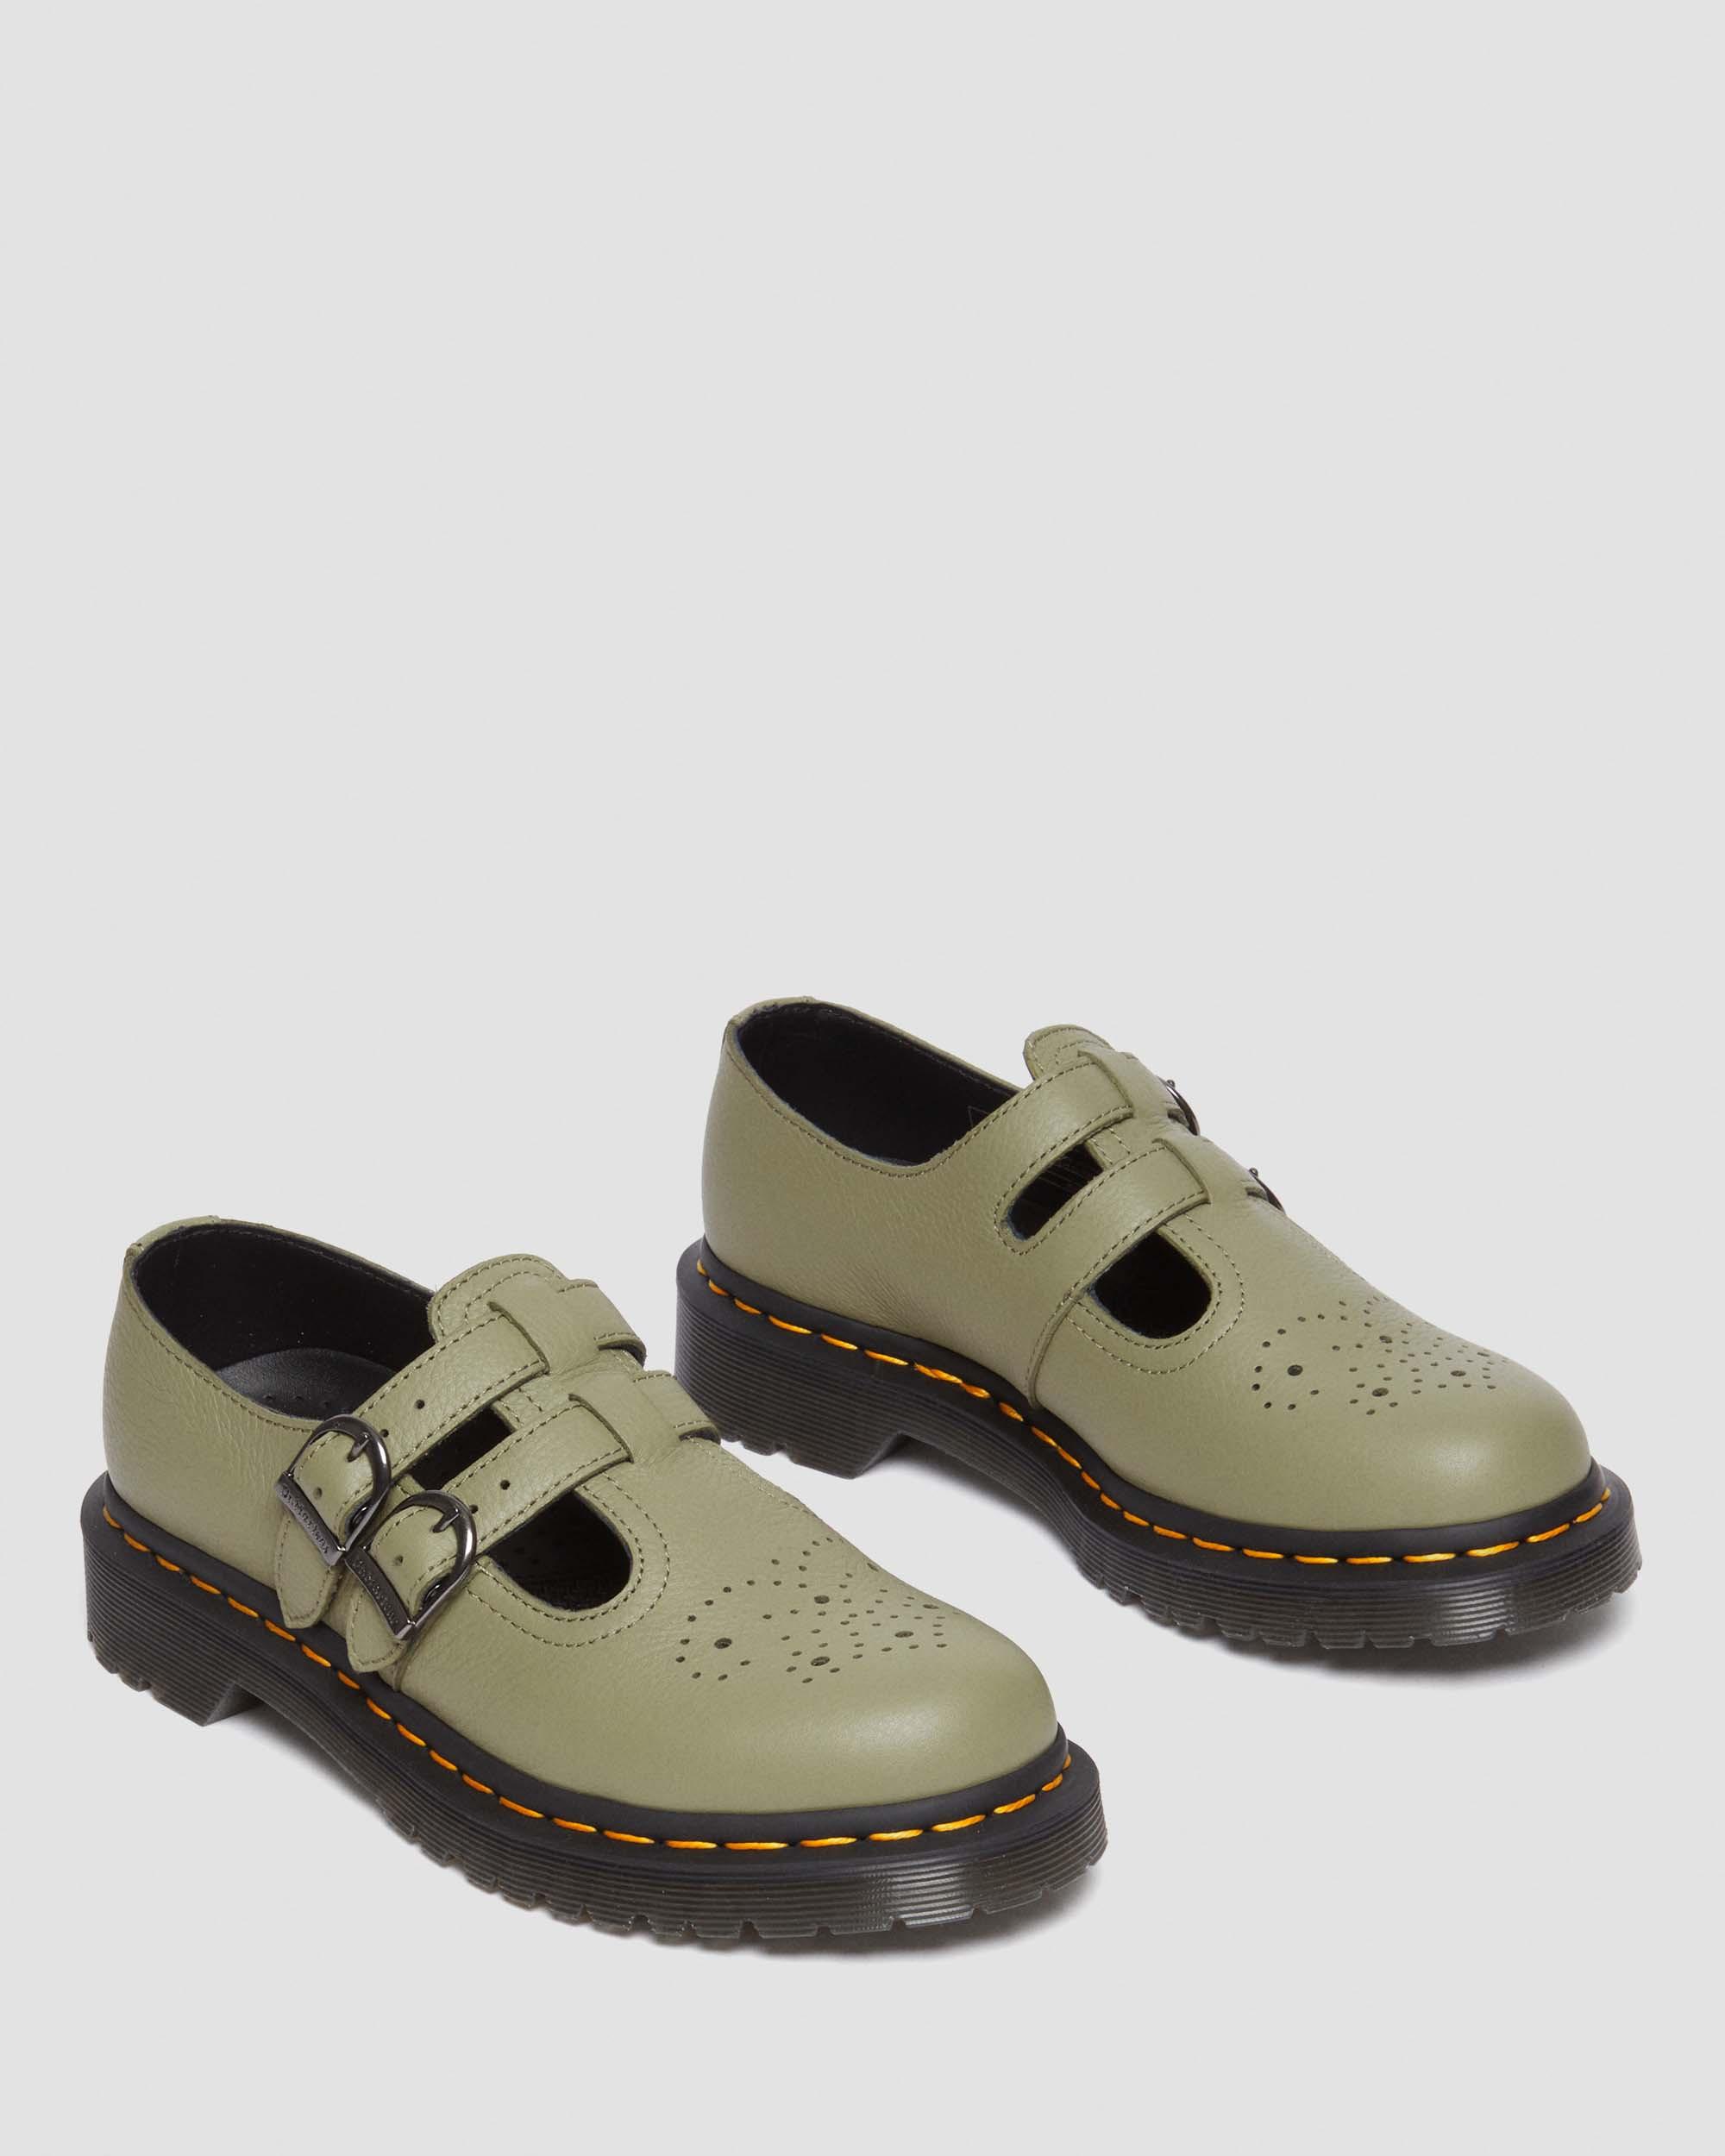 8065 Virginia Leather Mary Jane Shoes in Muted Olive